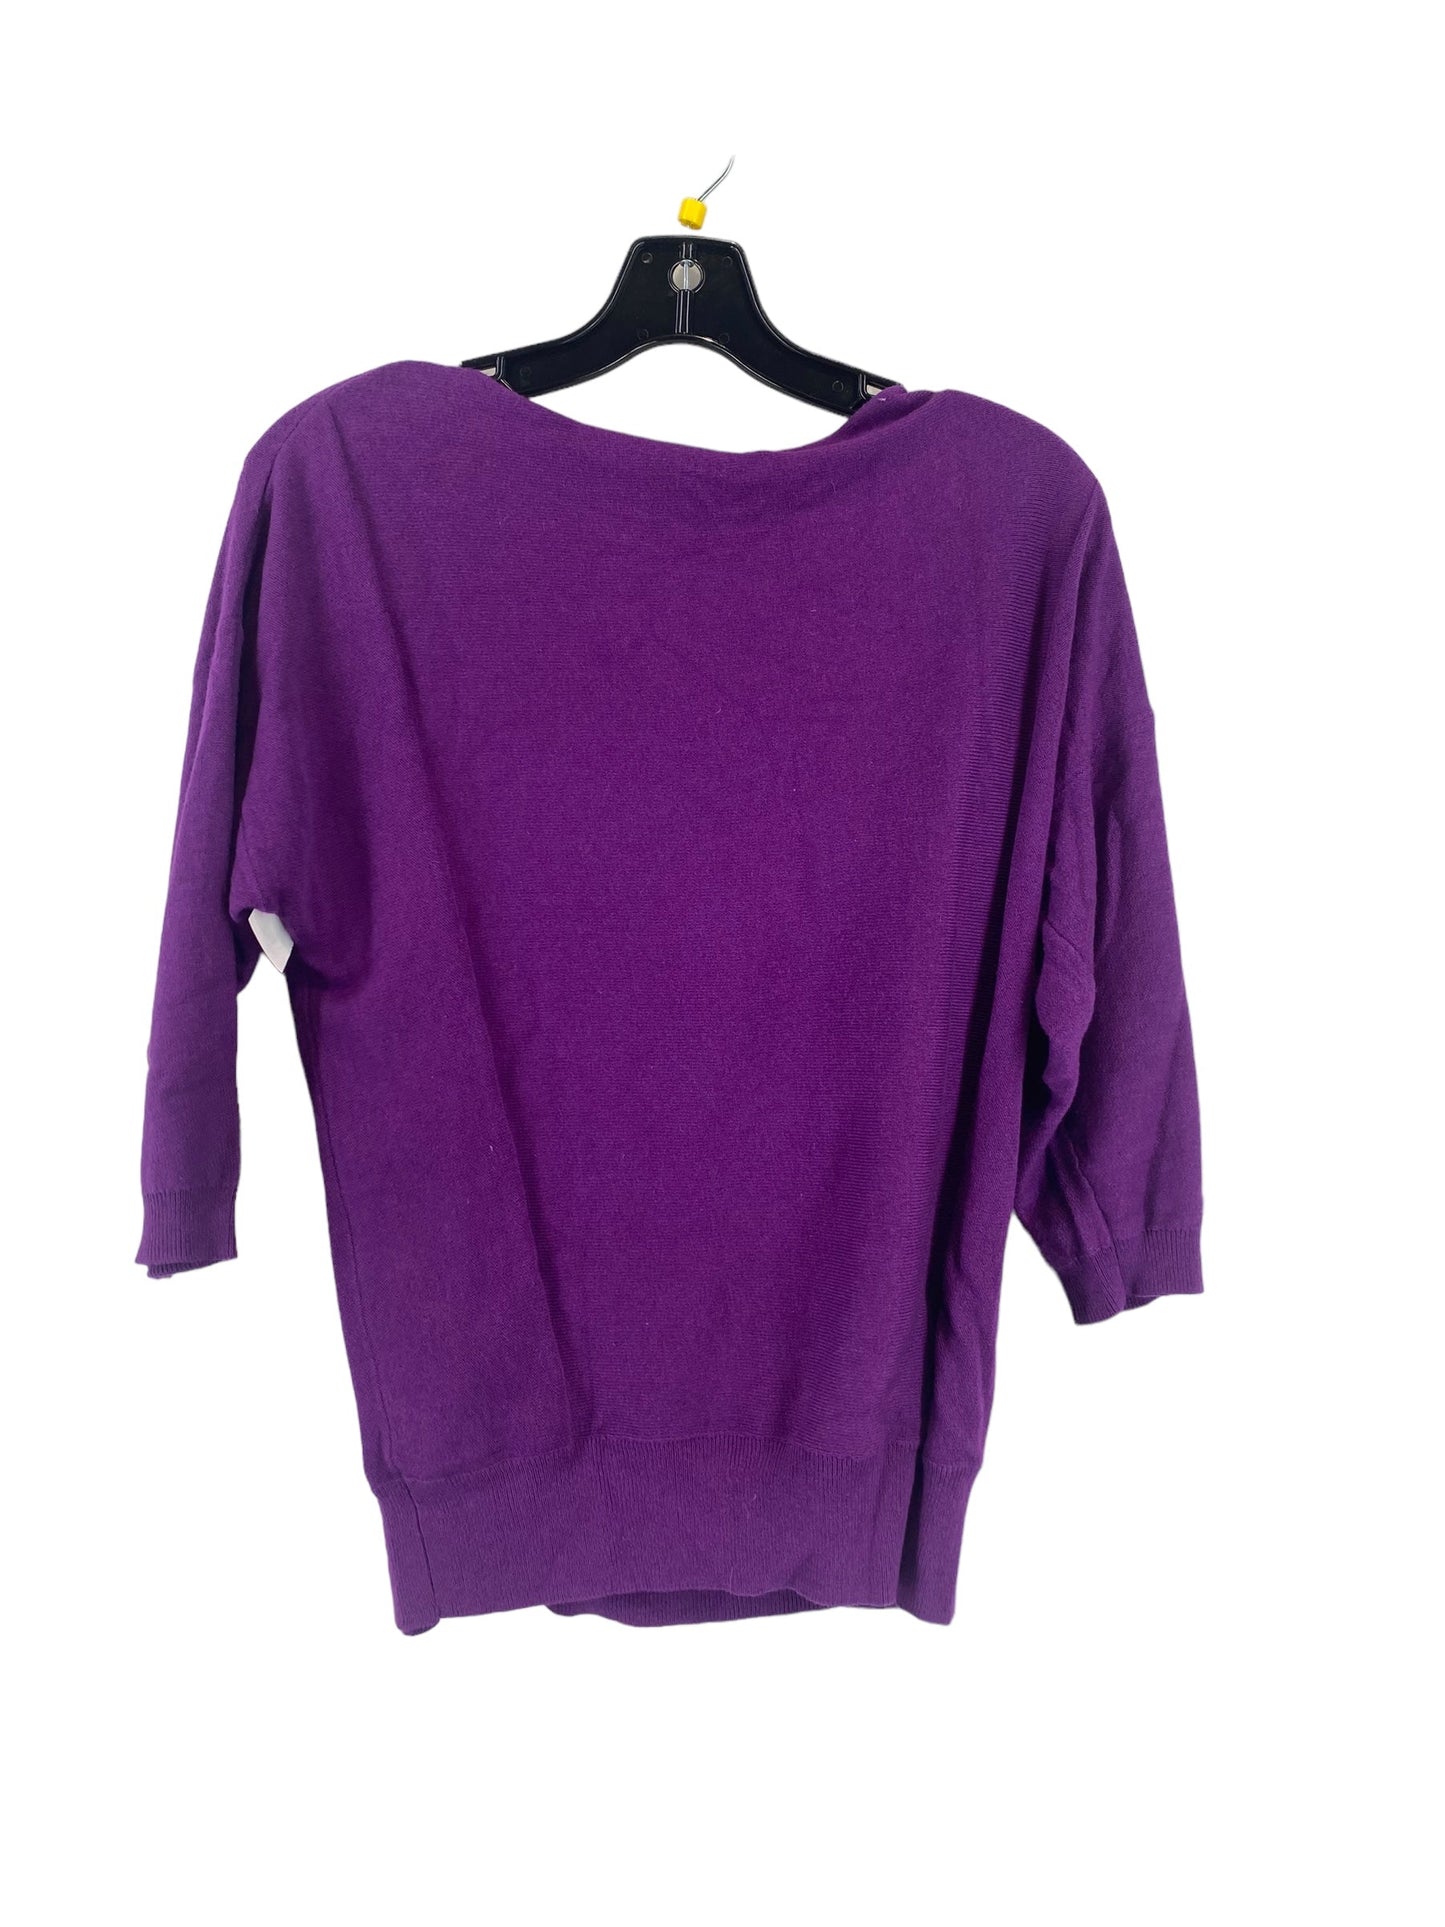 Purple Top Long Sleeve Chicos, Size 1